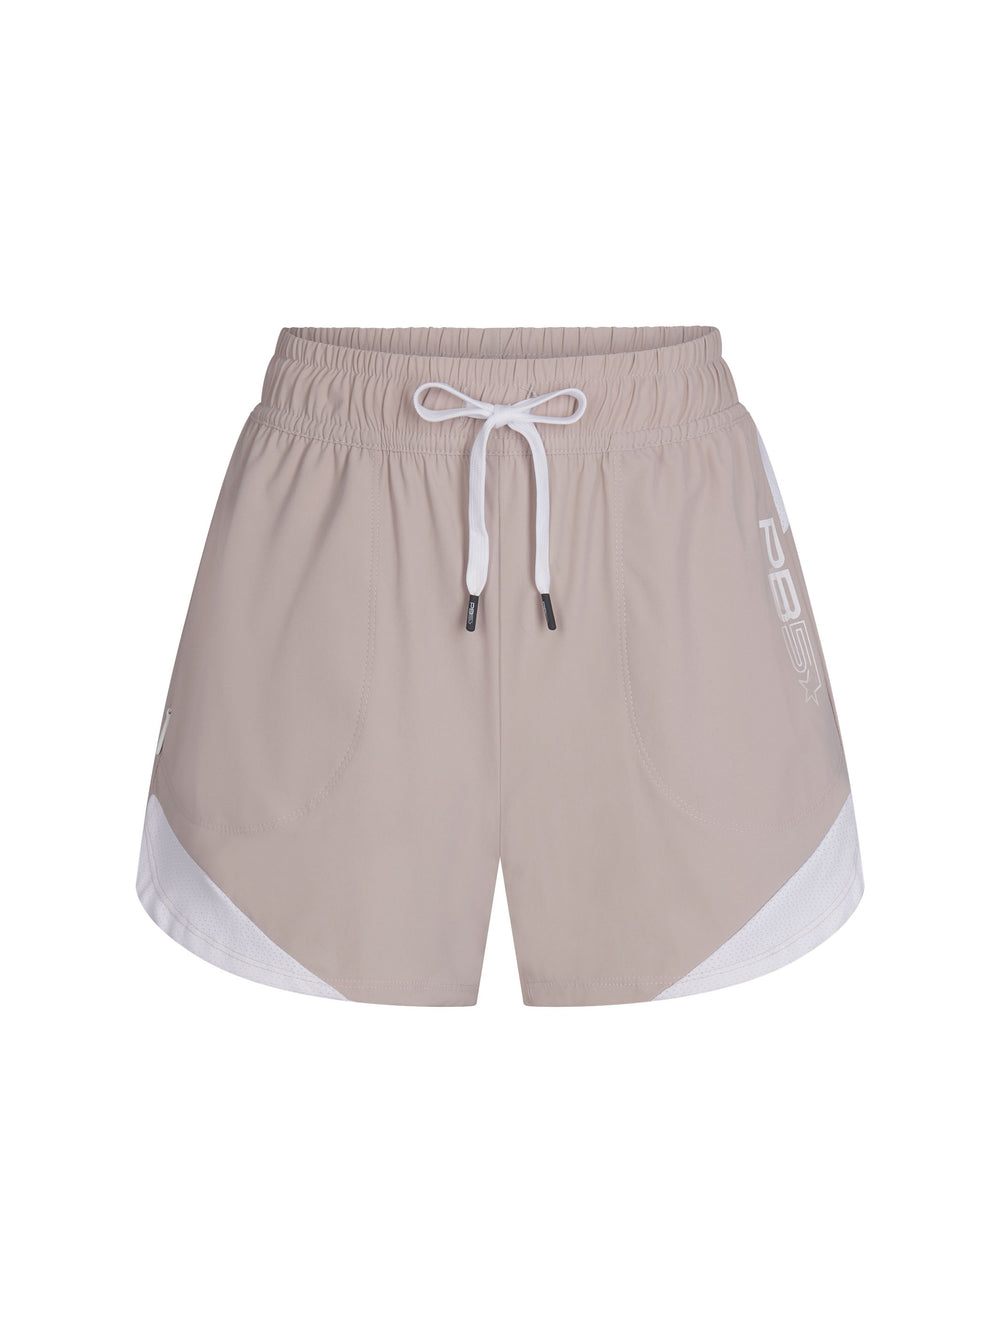 Women's Vented Court Short front view in Clay and White. Logo on left side seam.